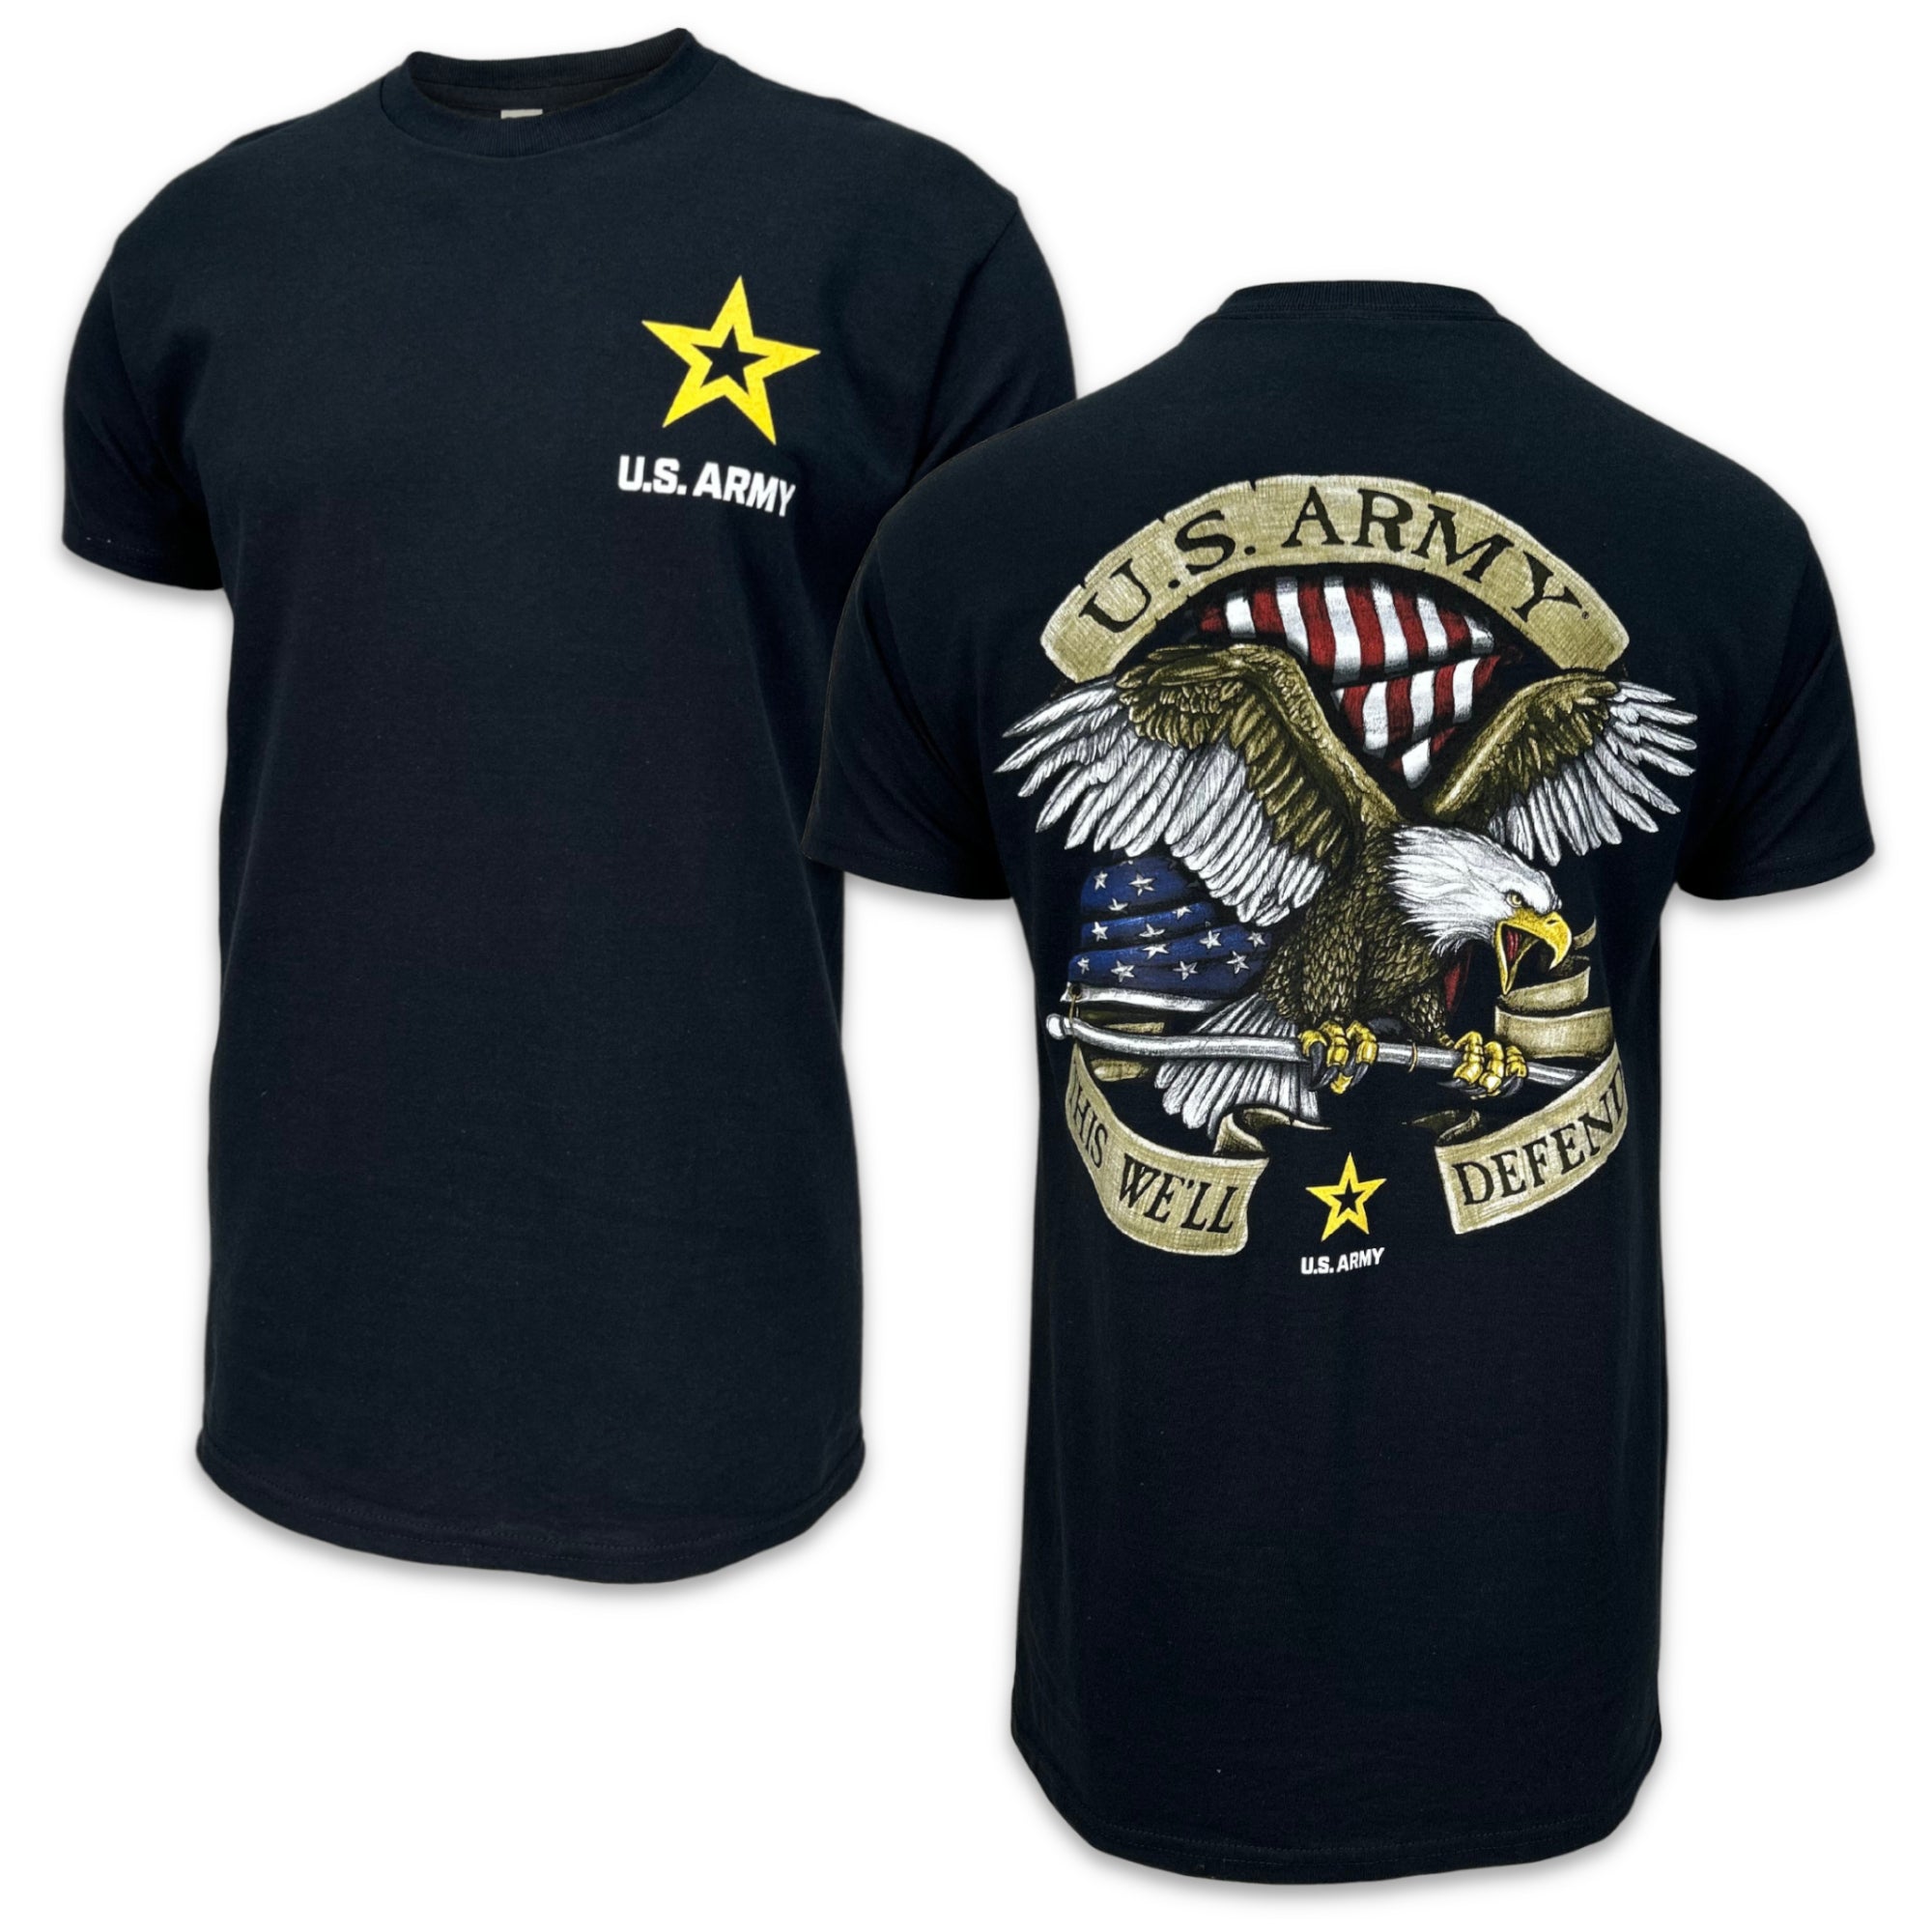 U.S. Army Flying Proud This We'll Defend T-Shirt (Black)